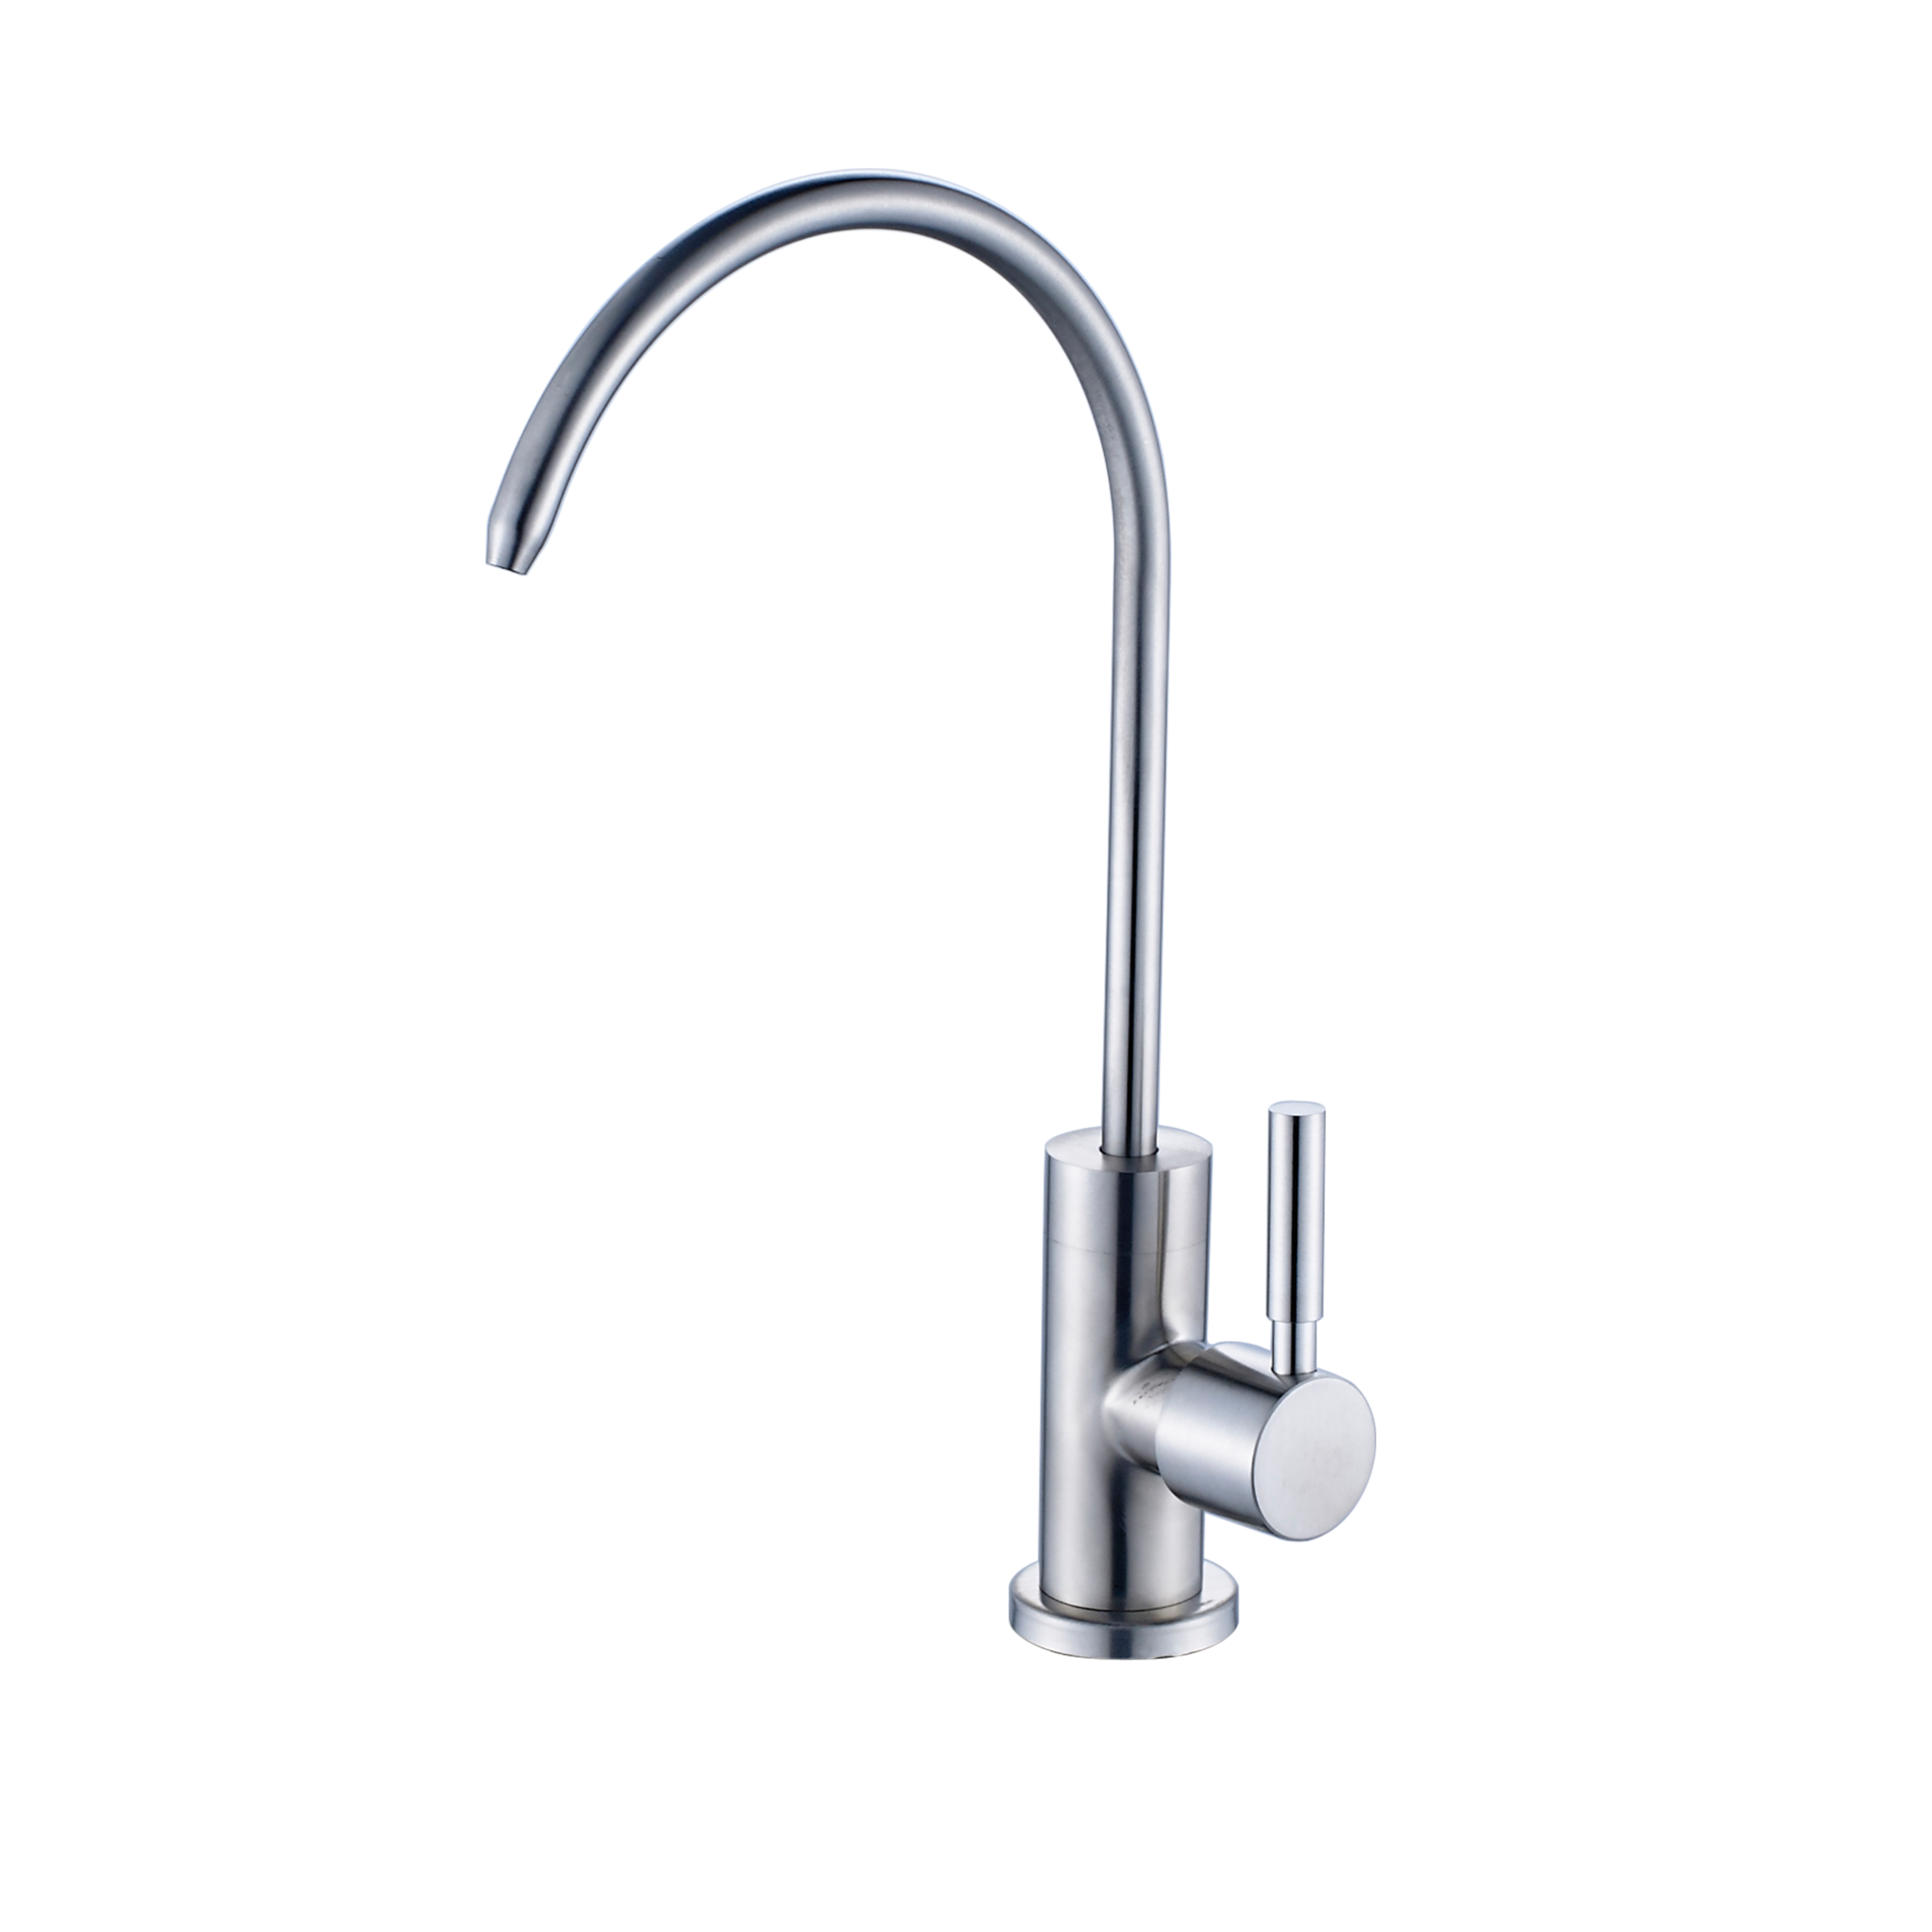 FLG brushed nickel single handle purified kitchen faucets 